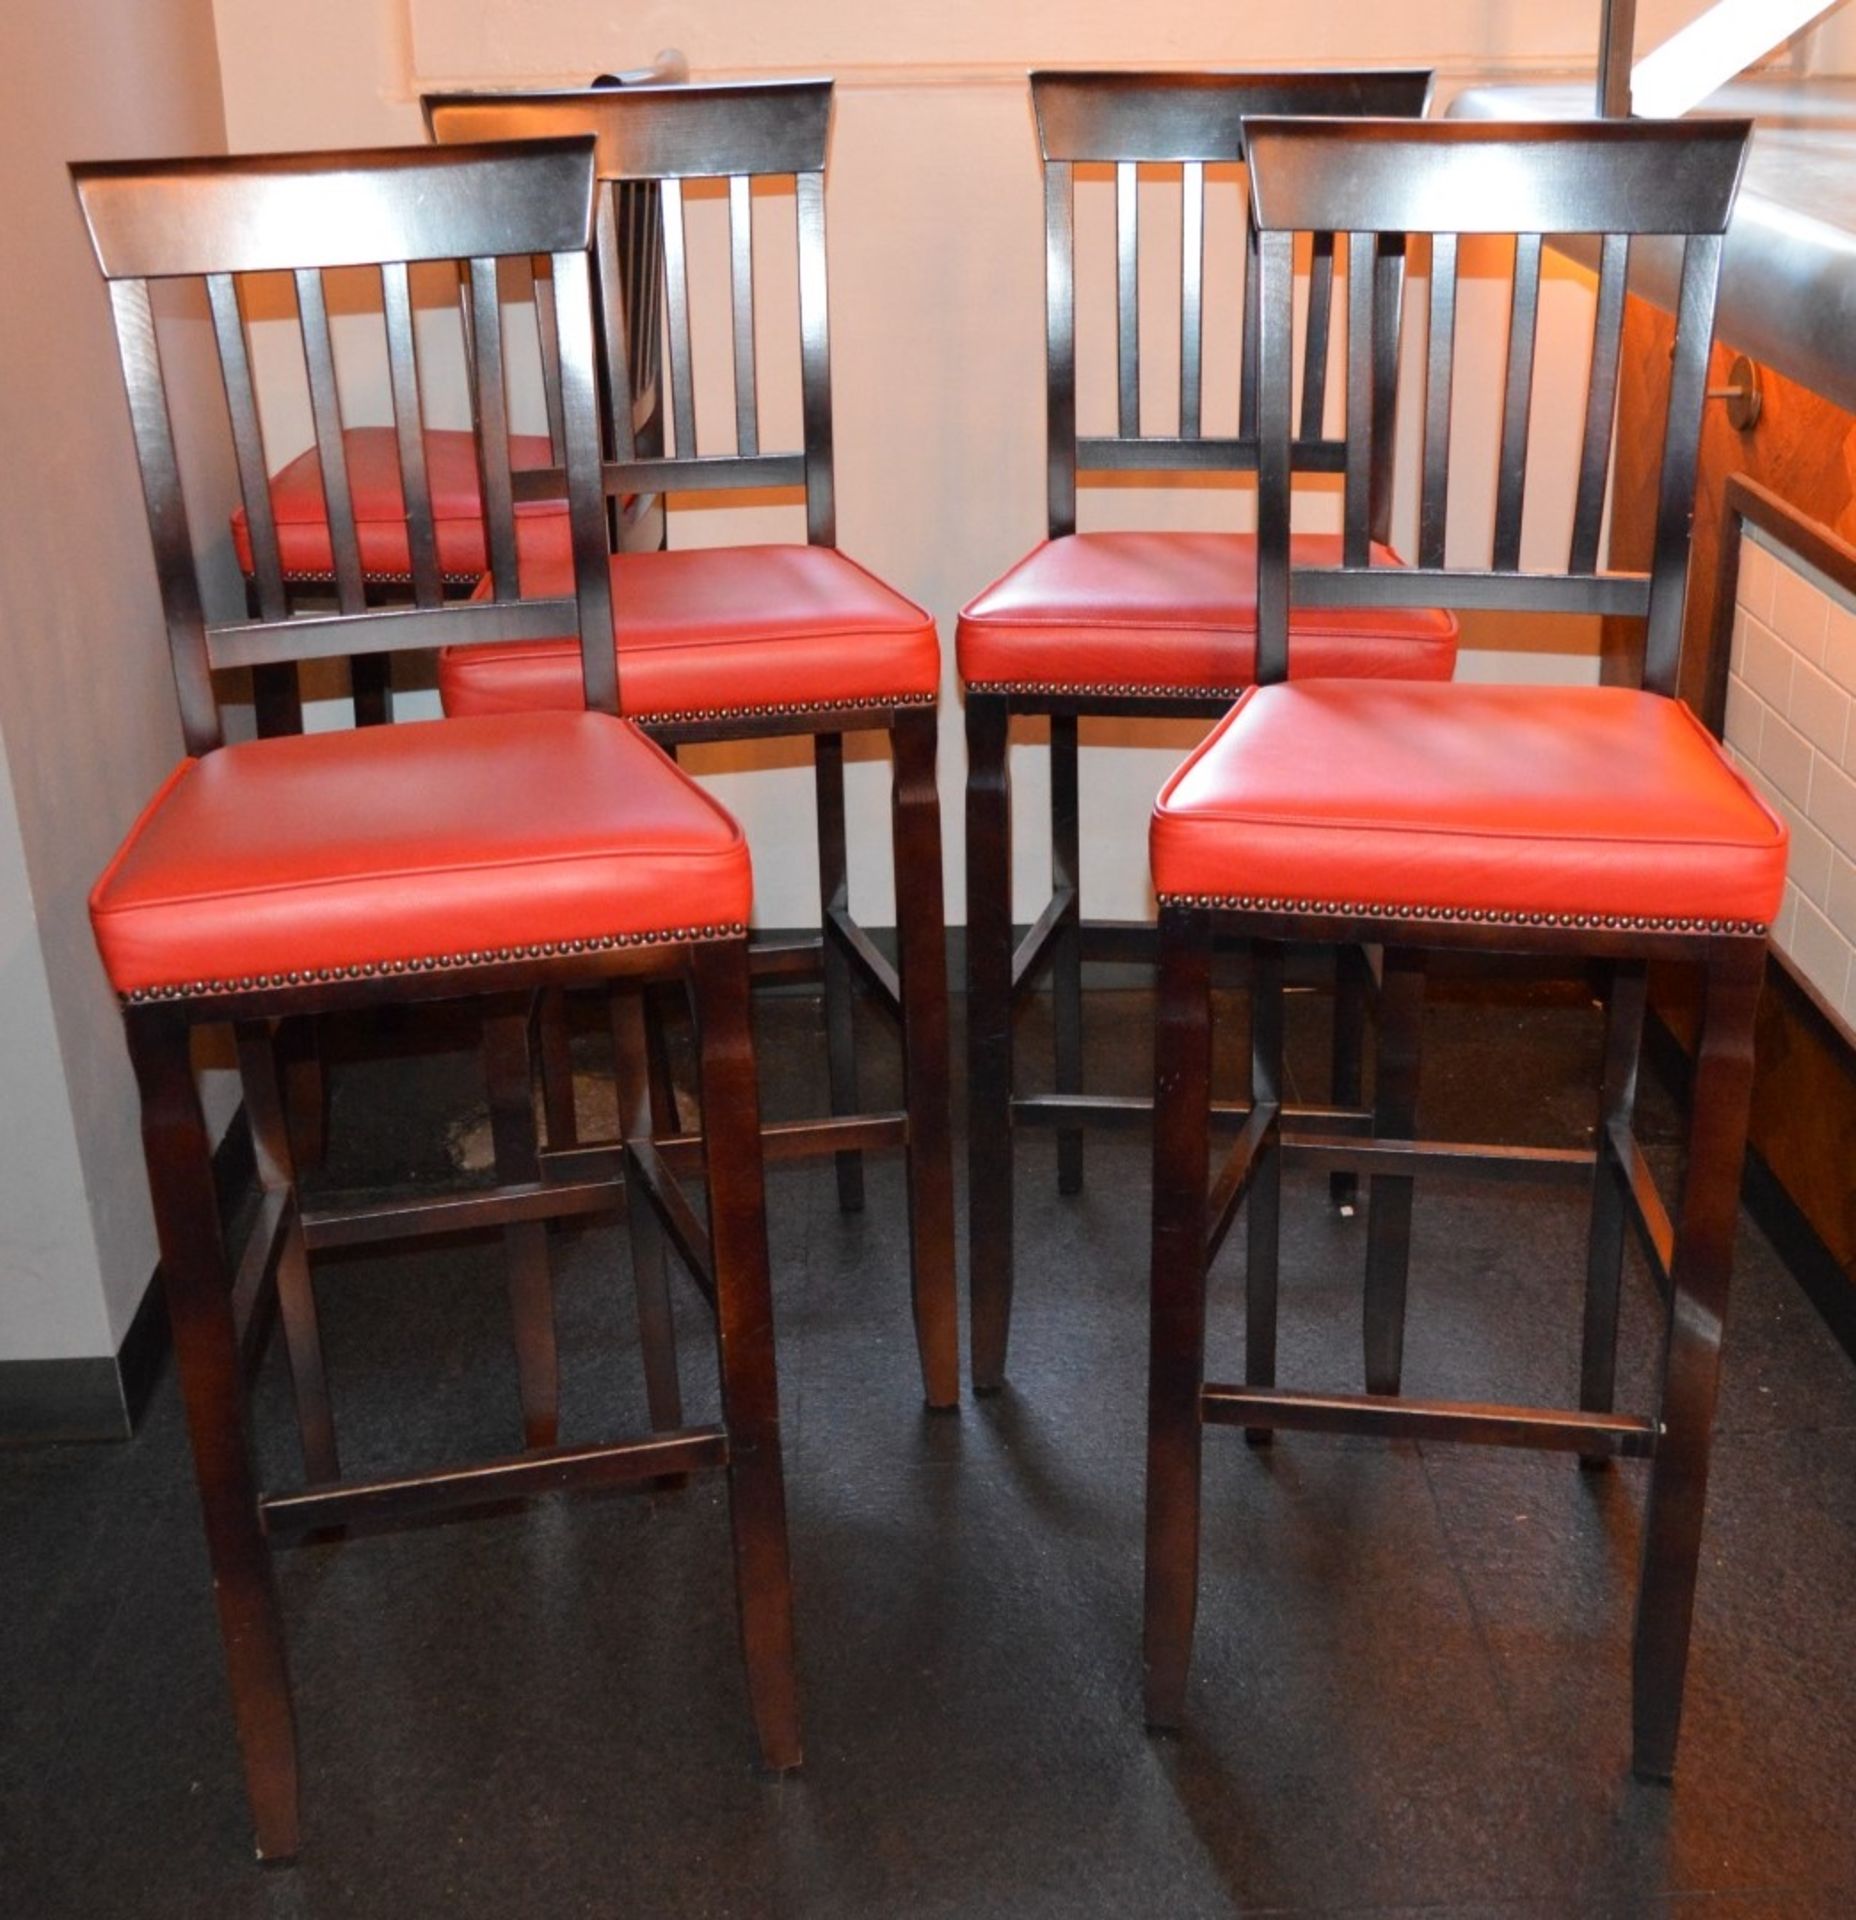 4 x Tall 'Harley' Bar Stools - Recently Removed From A City Centre Restaurant - Image 5 of 5